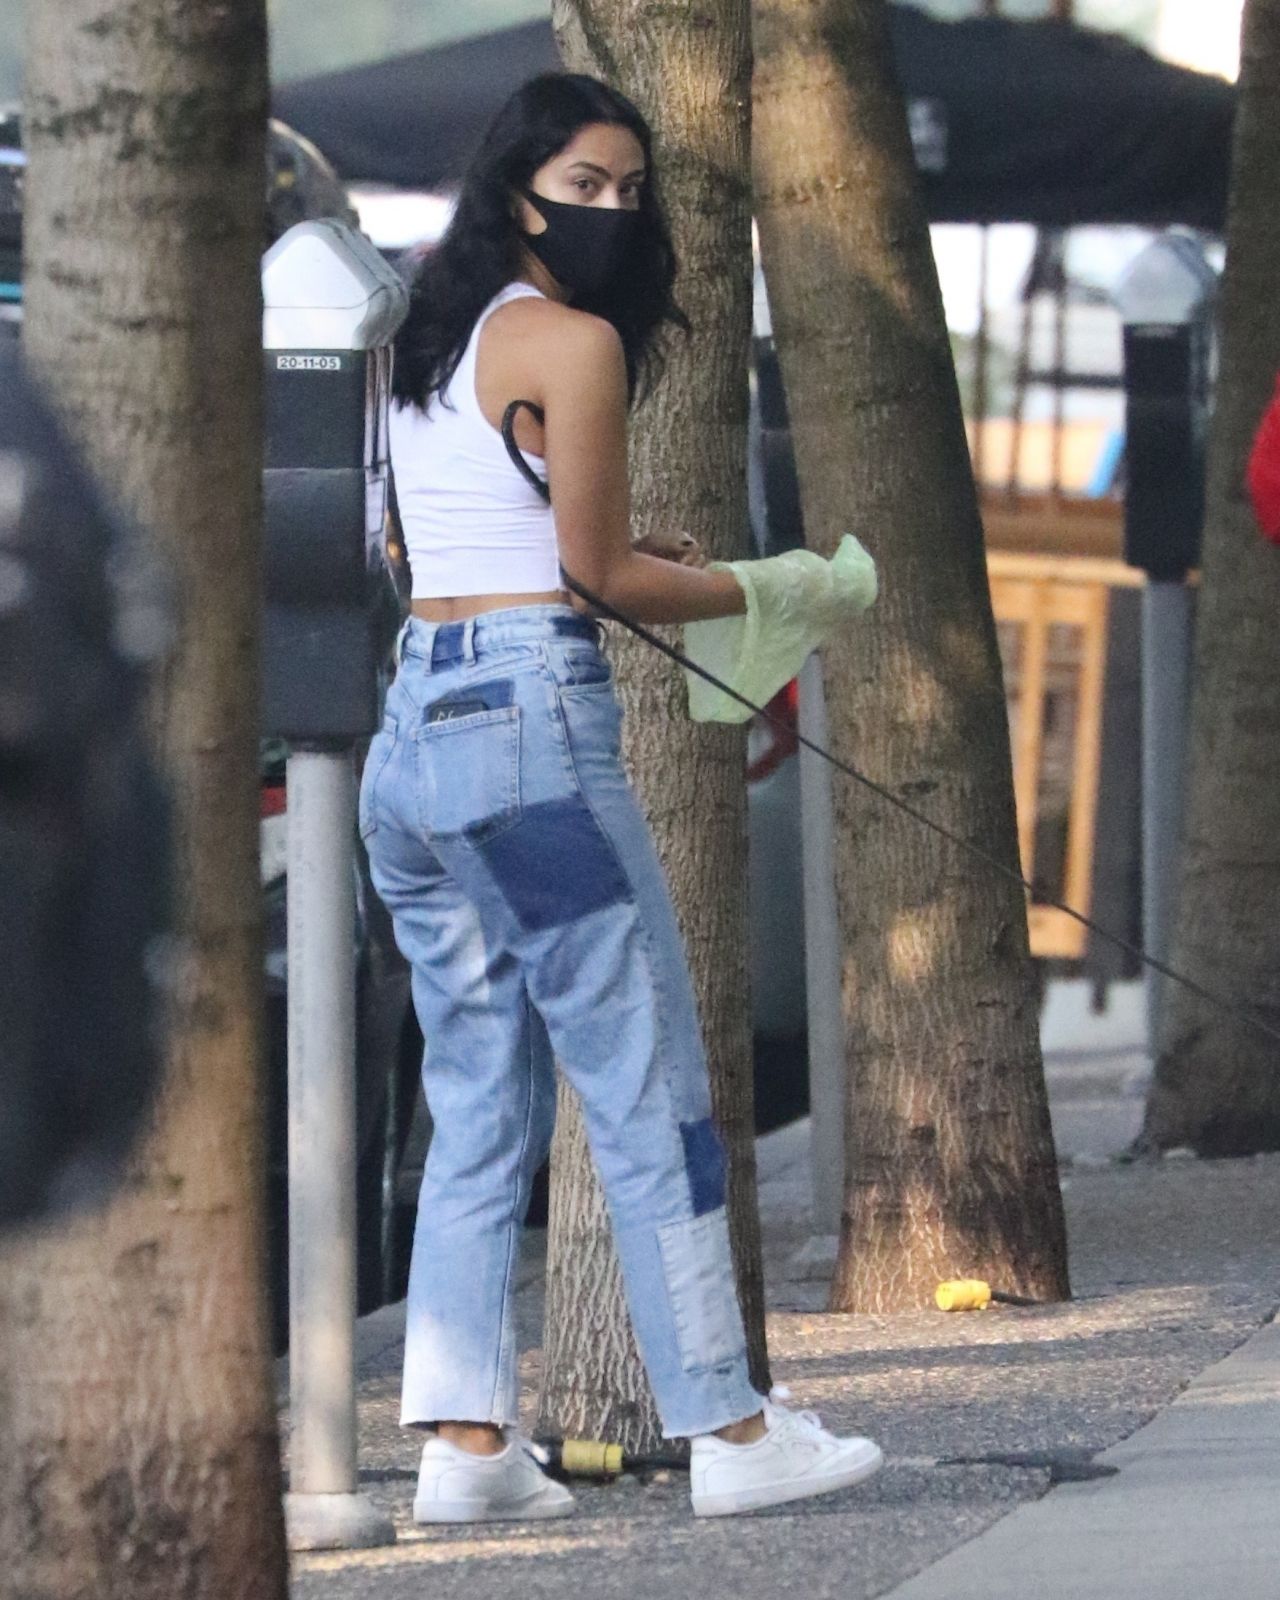 camila-mendes-out-in-vancouver-09-11-2020-3.jpg